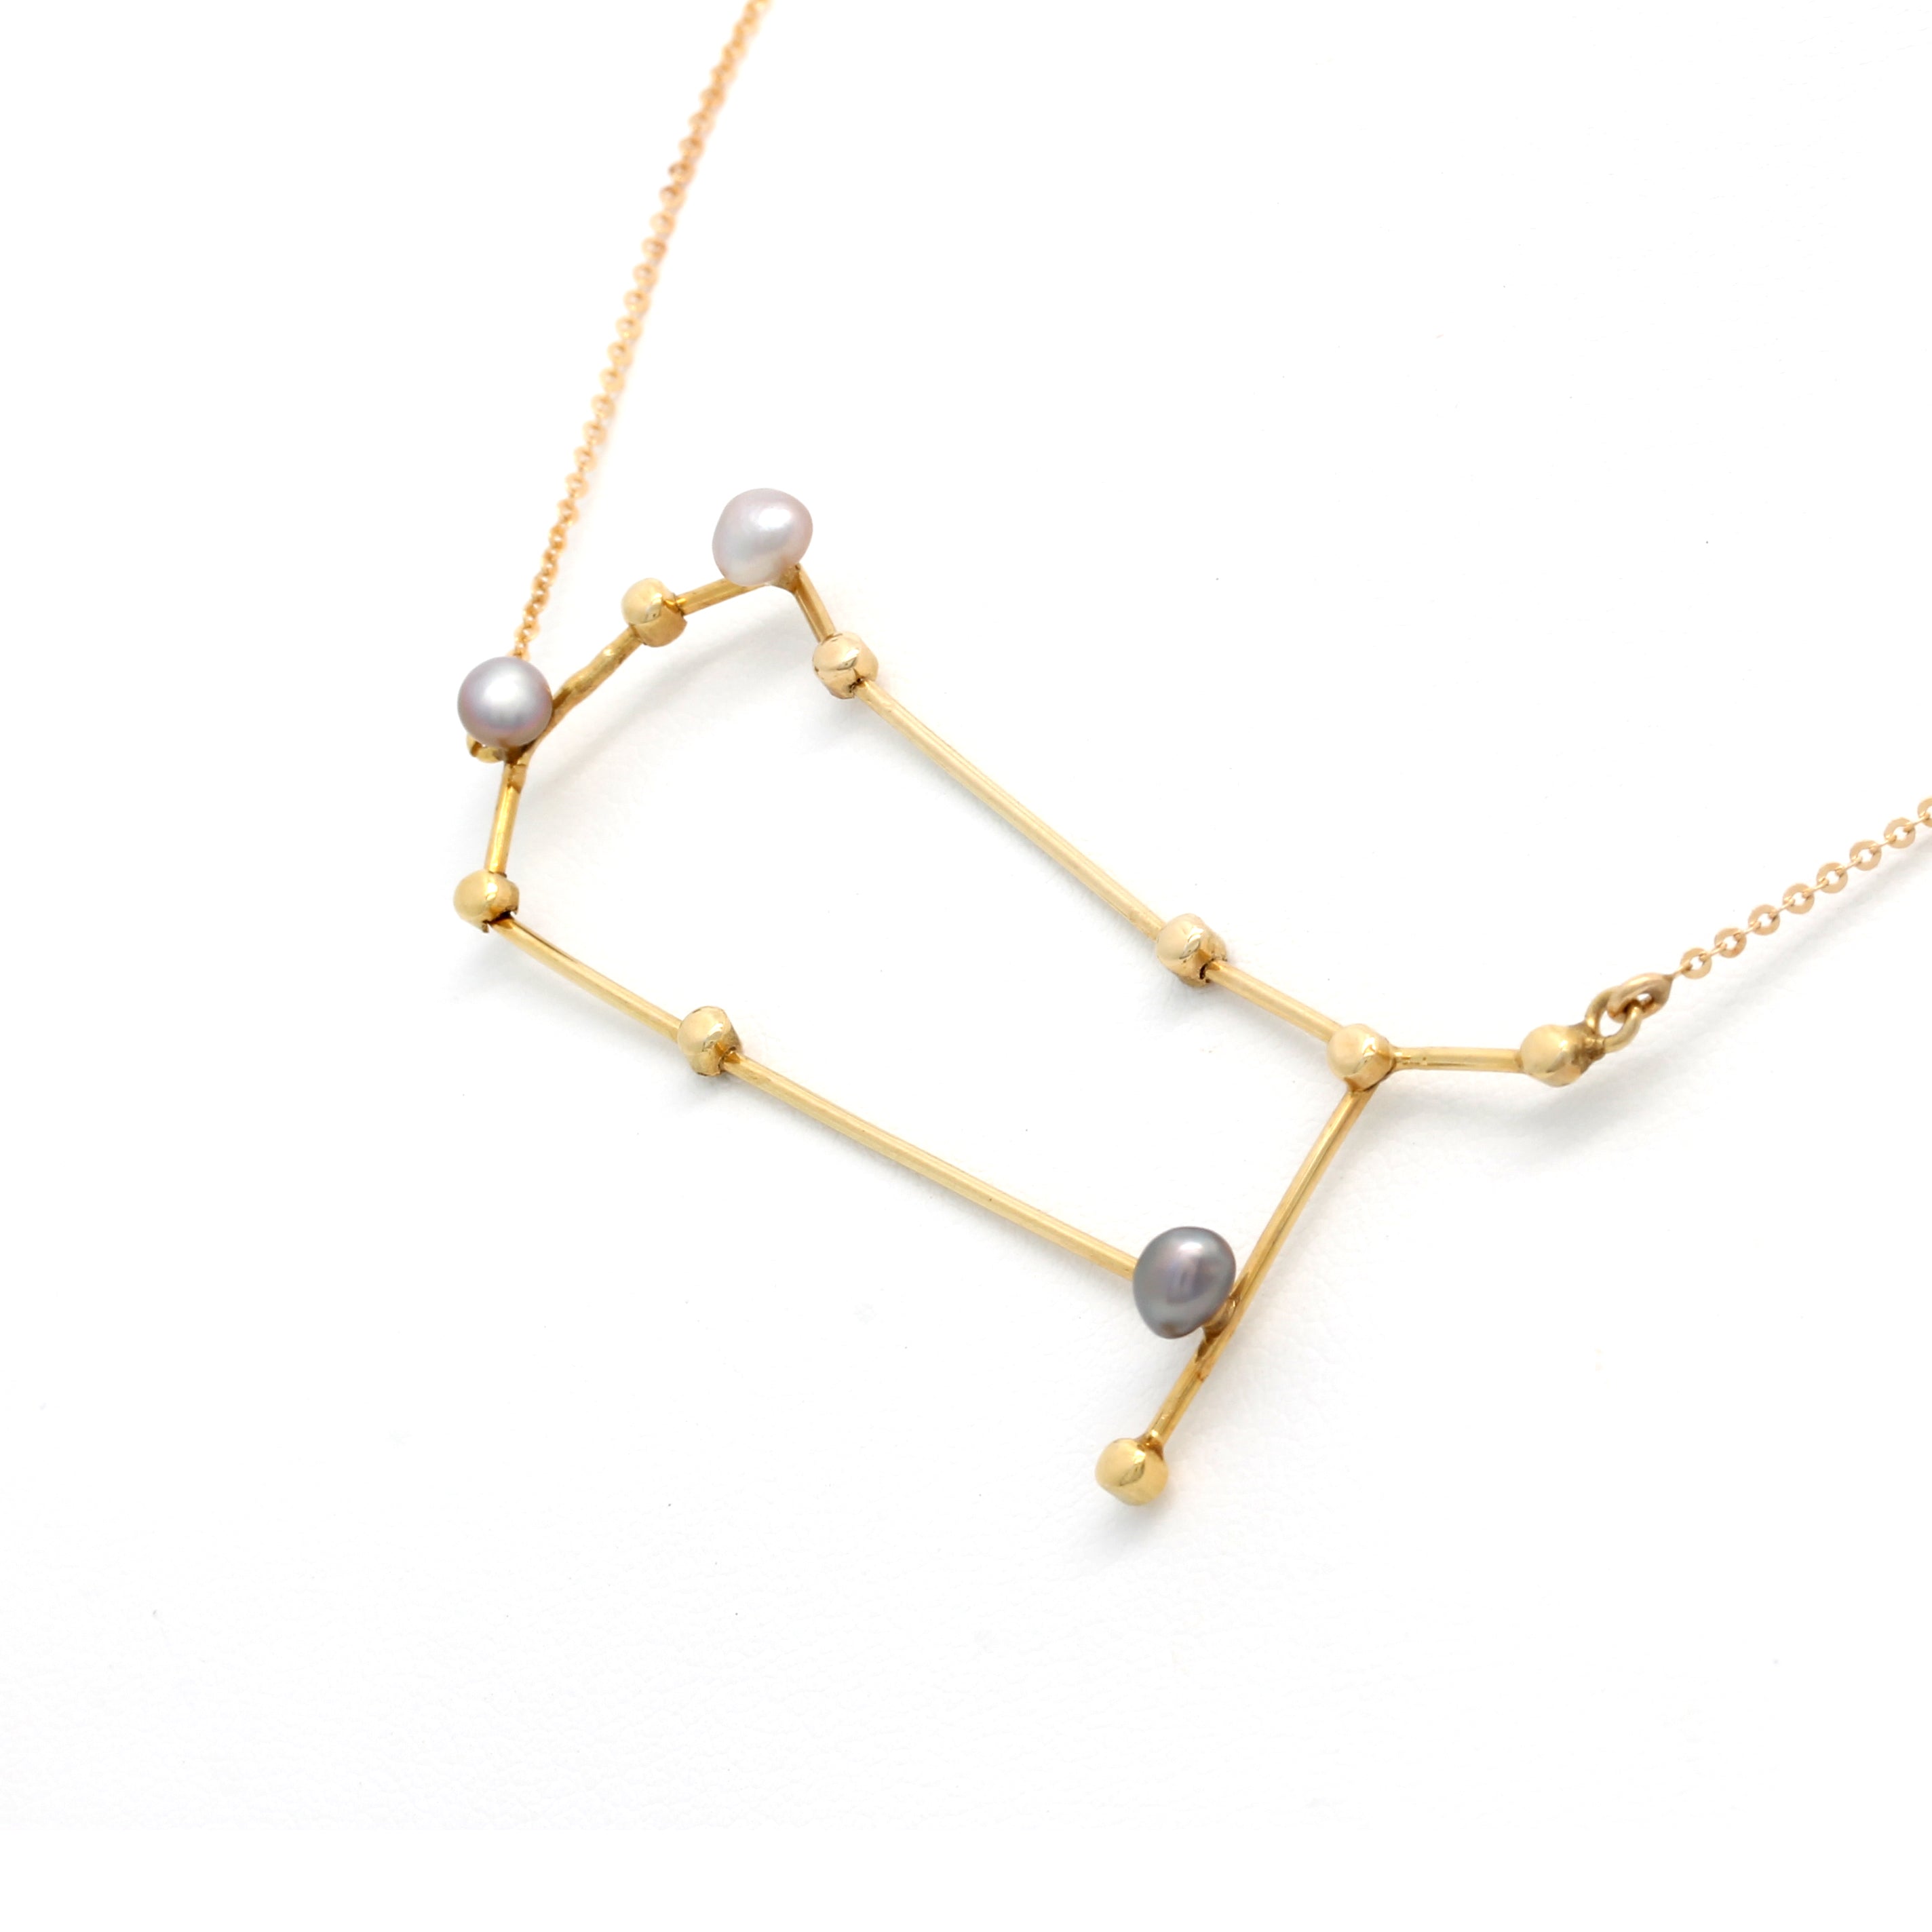 "Gemini (May 21st - Jun 20th)" 14K Yellow Gold Pendant and Chain with Cortez Keshi Pearls